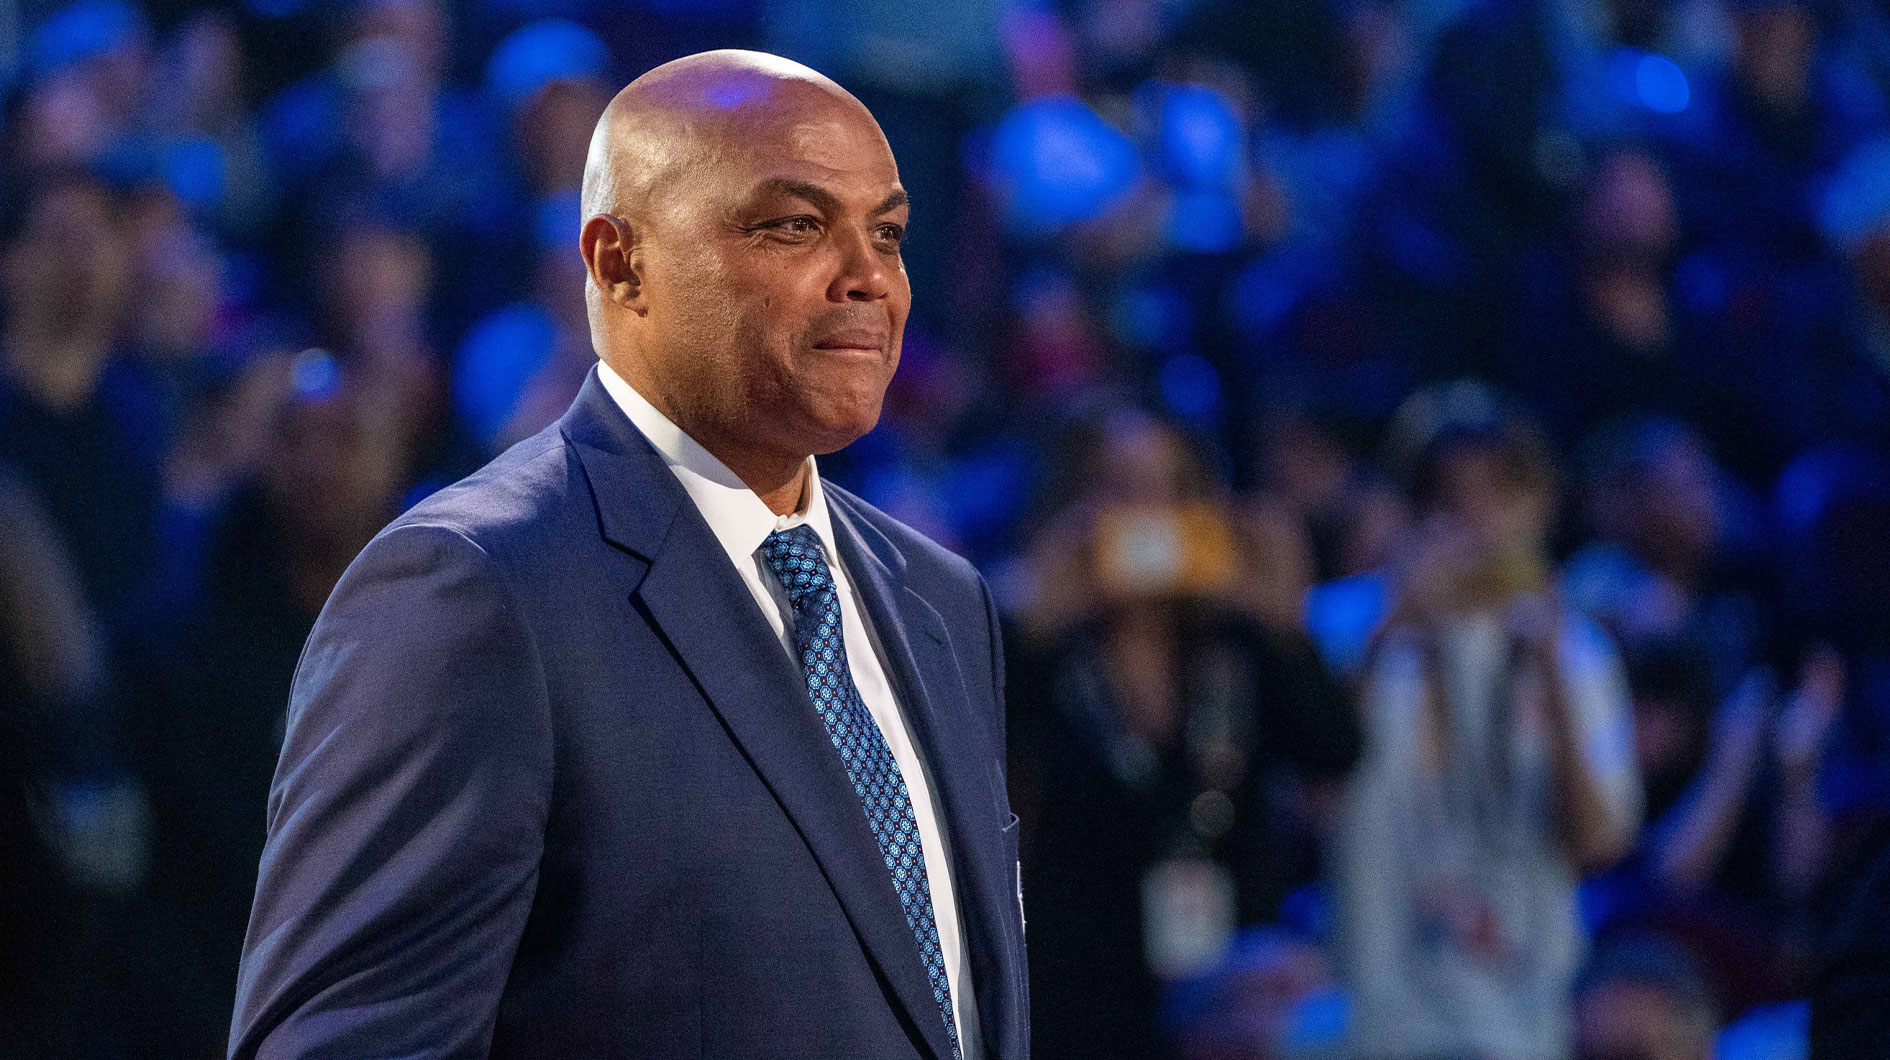 NBA great Charles Barkley is honored for being selected to the NBA 75th Anniversary Team during halftime in the 2022 NBA All-Star Game at Rocket Mortgage FieldHouse. 